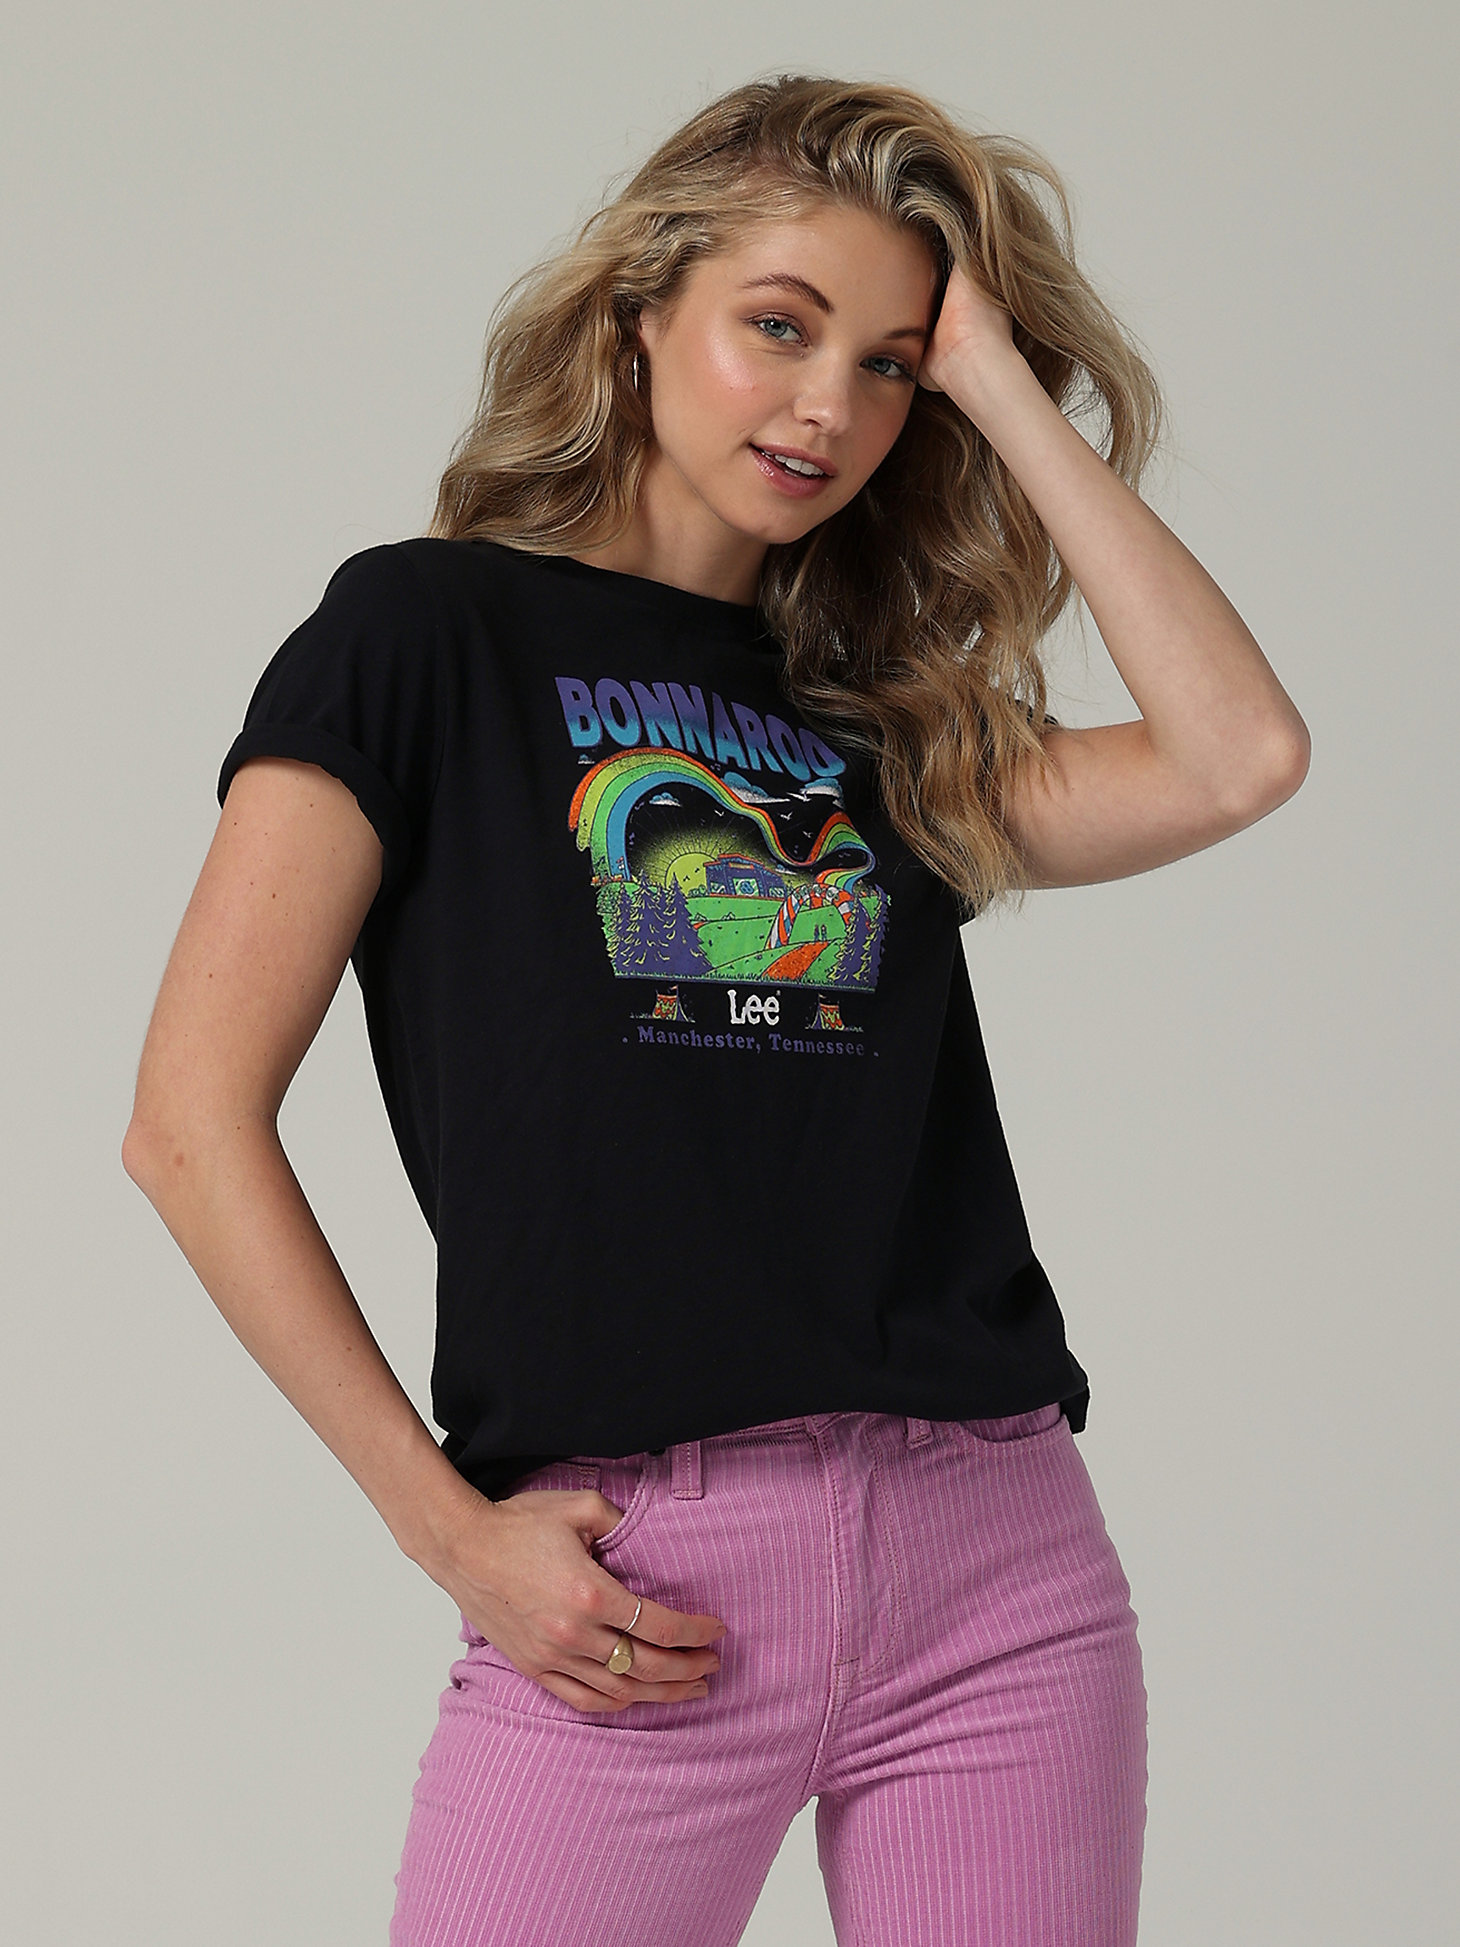 Women's Lee x Bonnaroo Festival Graphic Tee in Washed Black alternative view 1